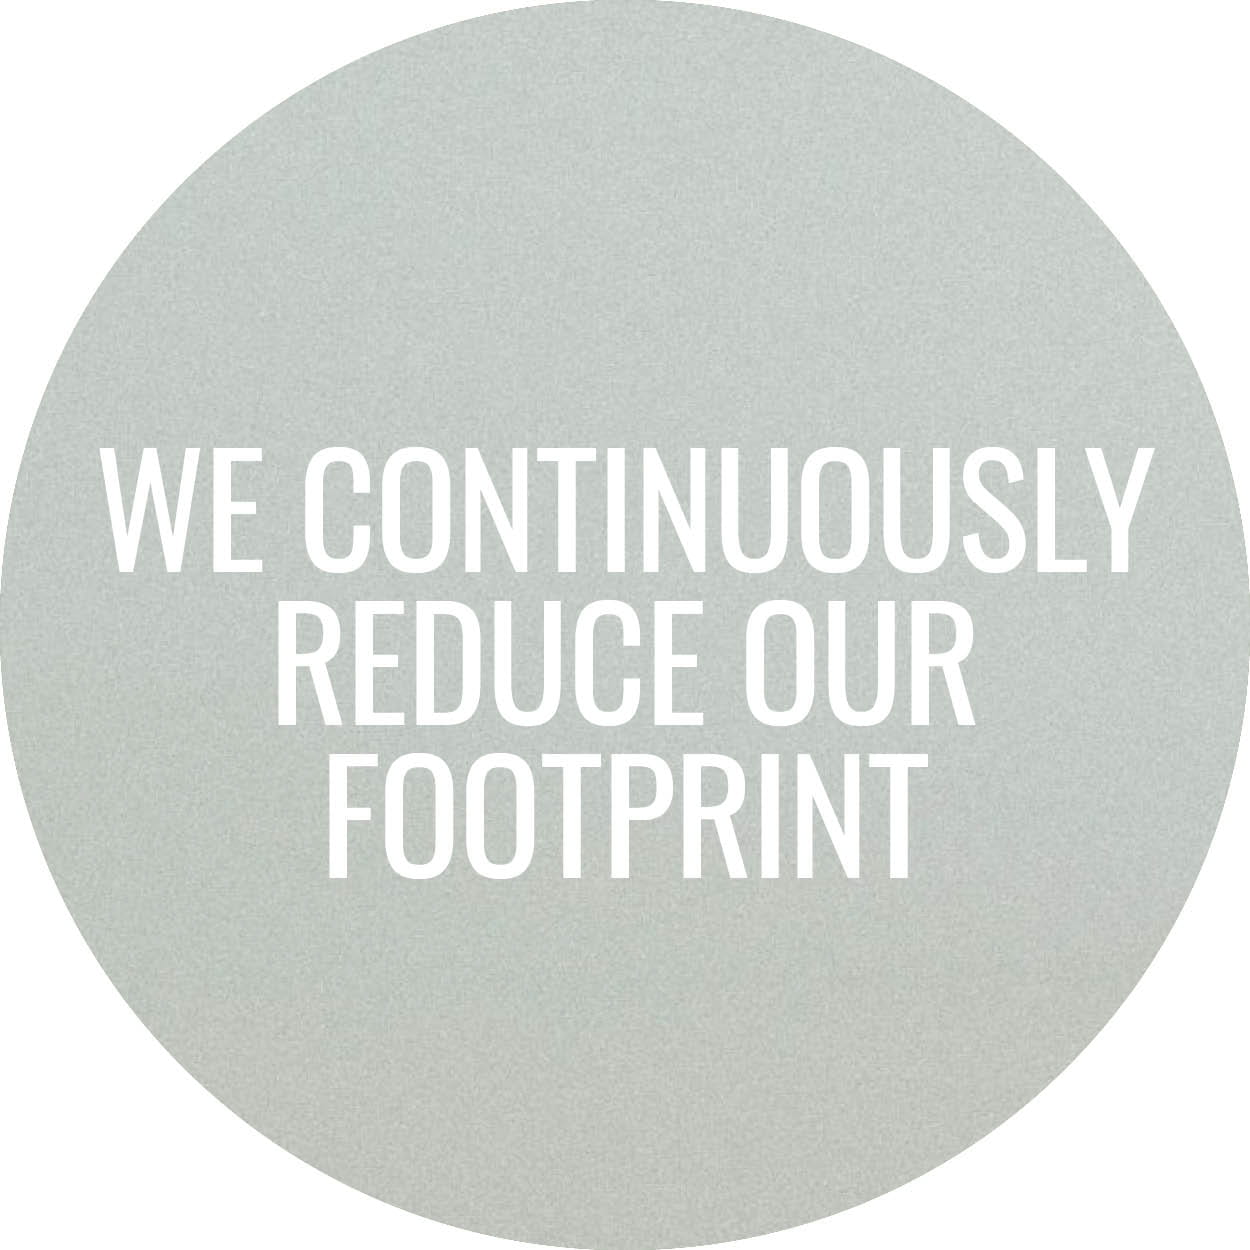 We continuously reduce our footprint